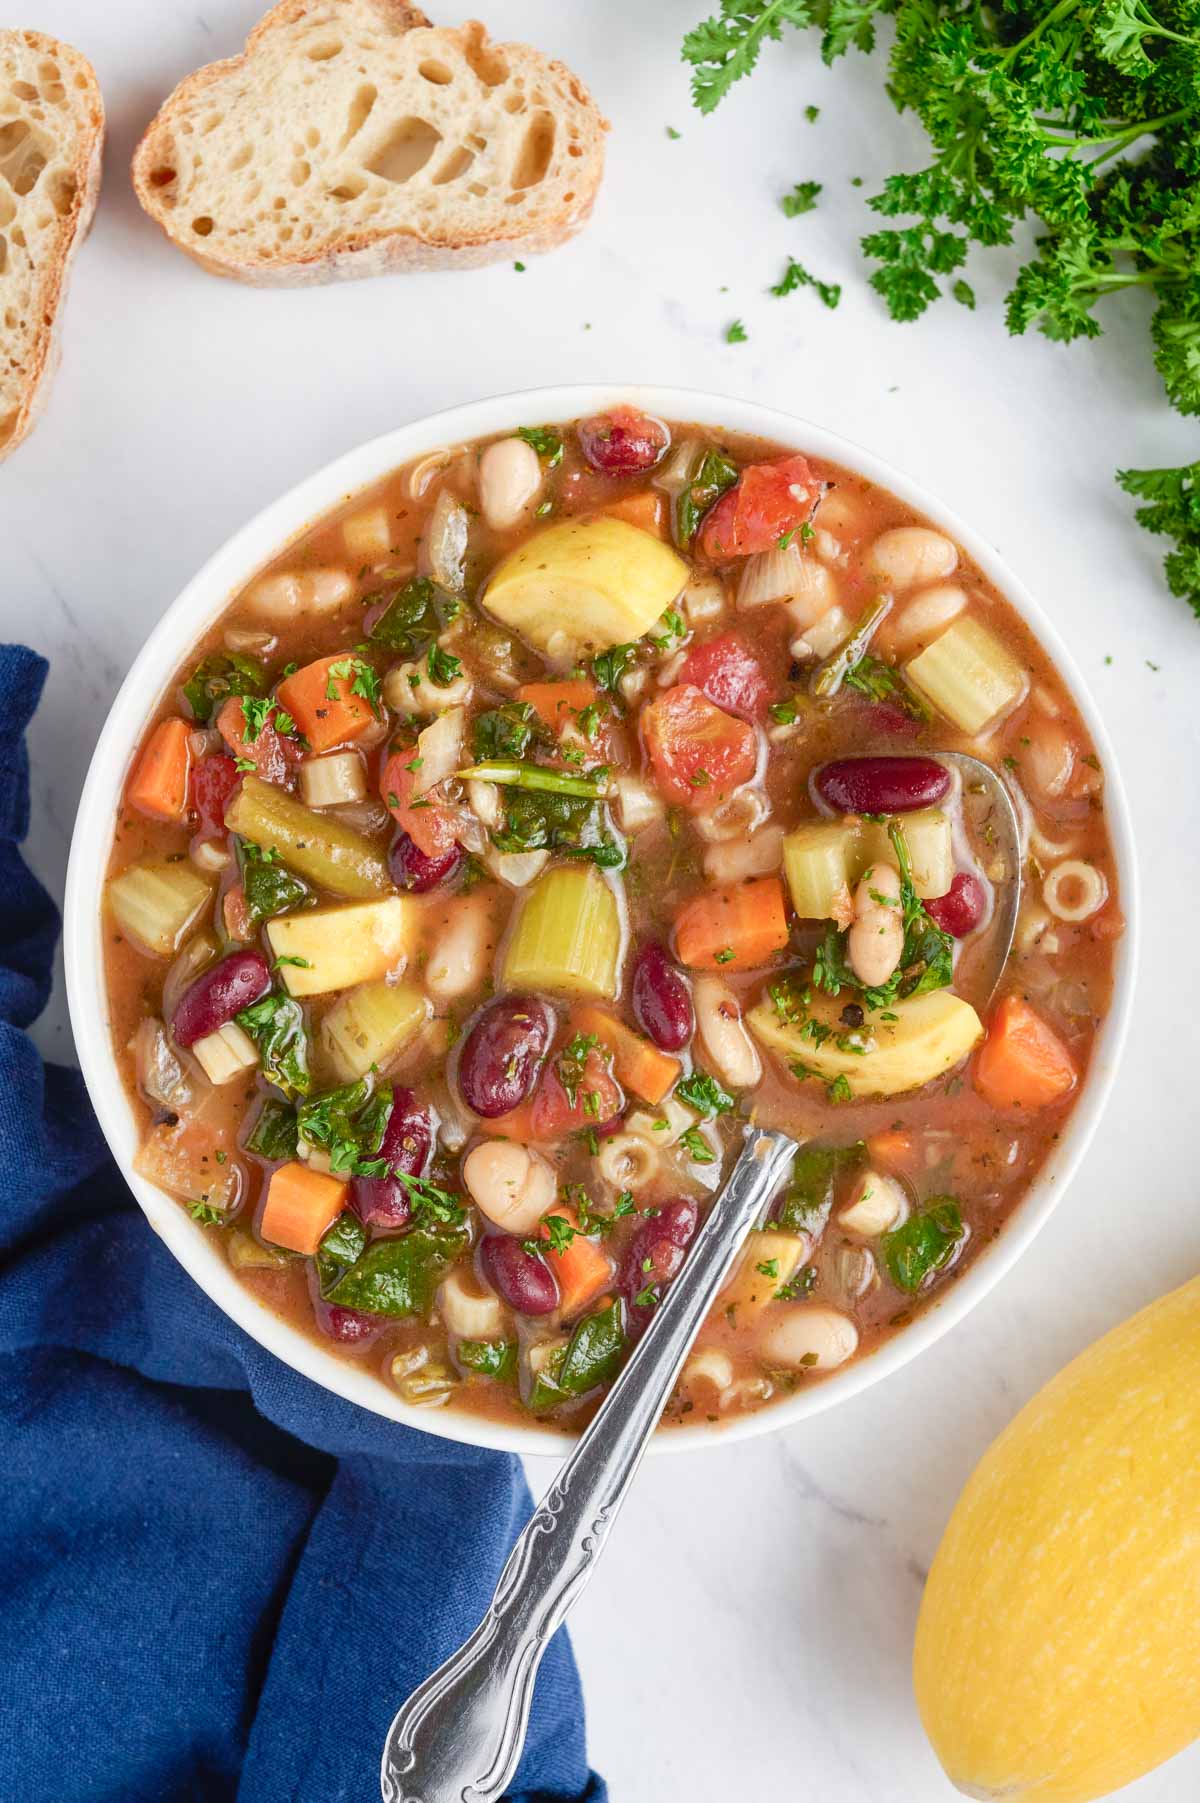 A big bowl of healthy minestrone soup full of vegetables.